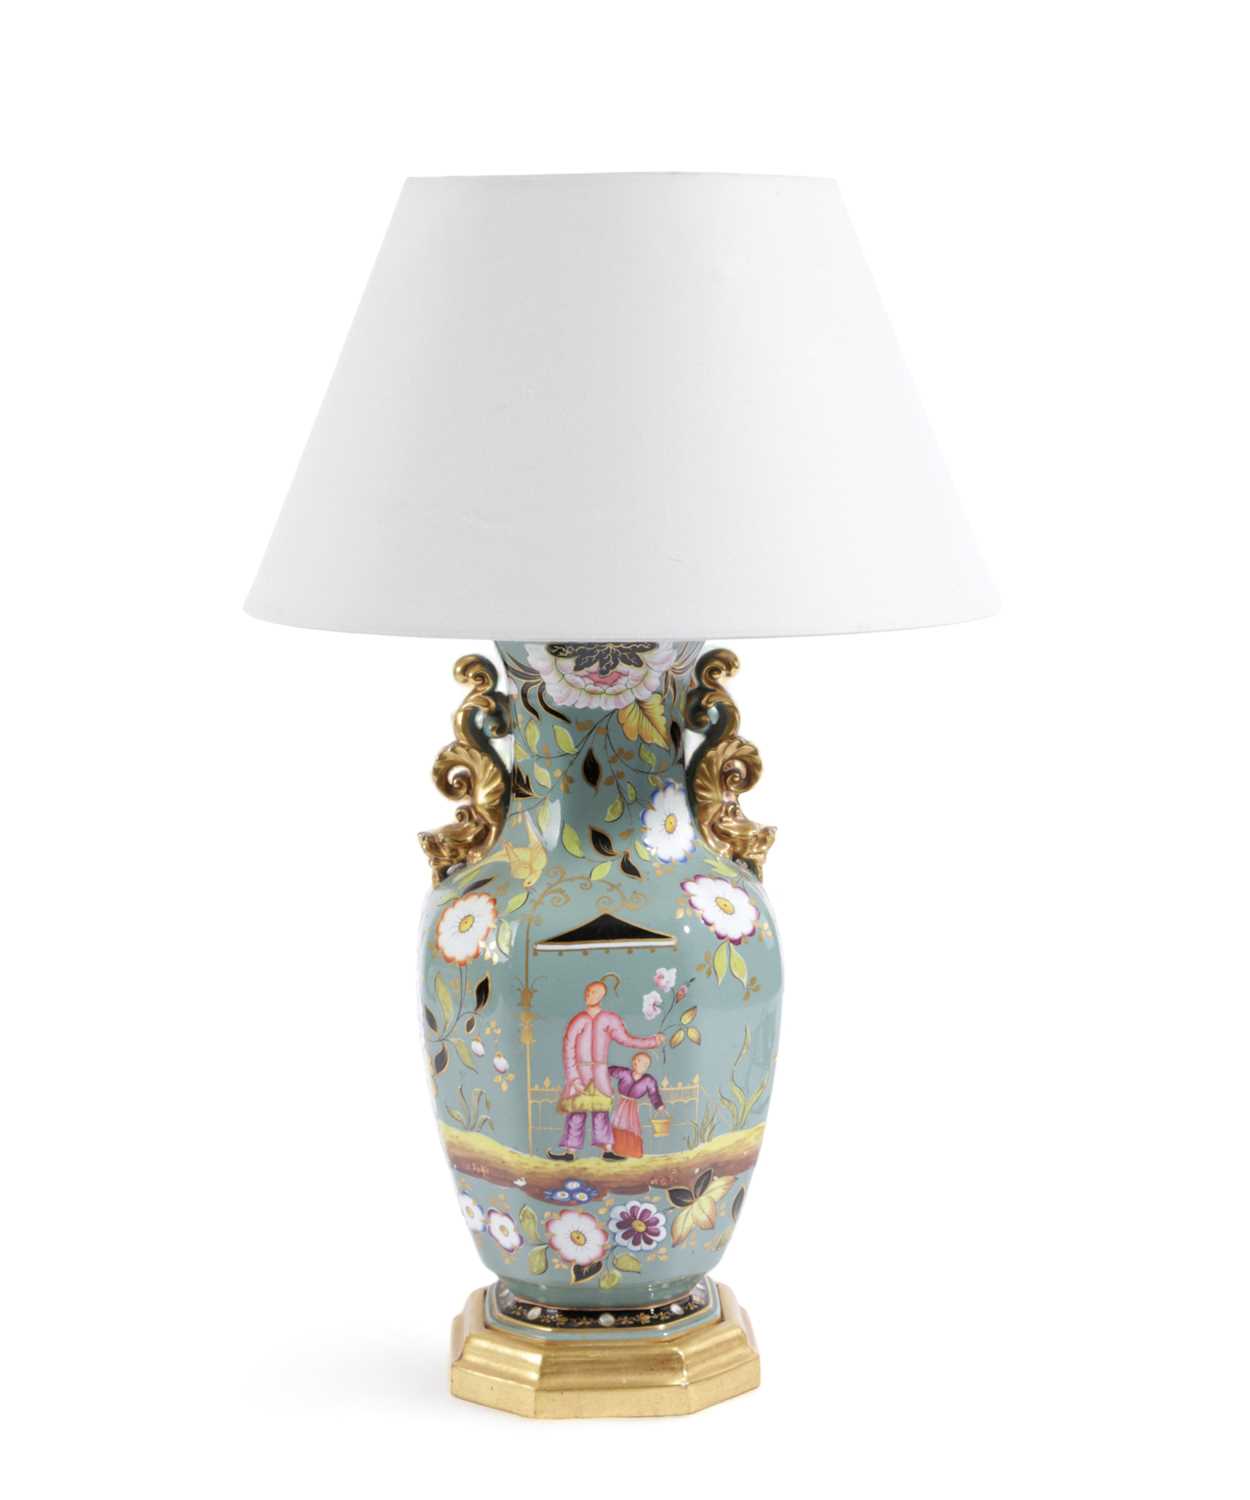 A MASON'S IRONSTONE VASE TABLE LAMP 19TH CENTURY of baluster form, well decorated in chinoiserie